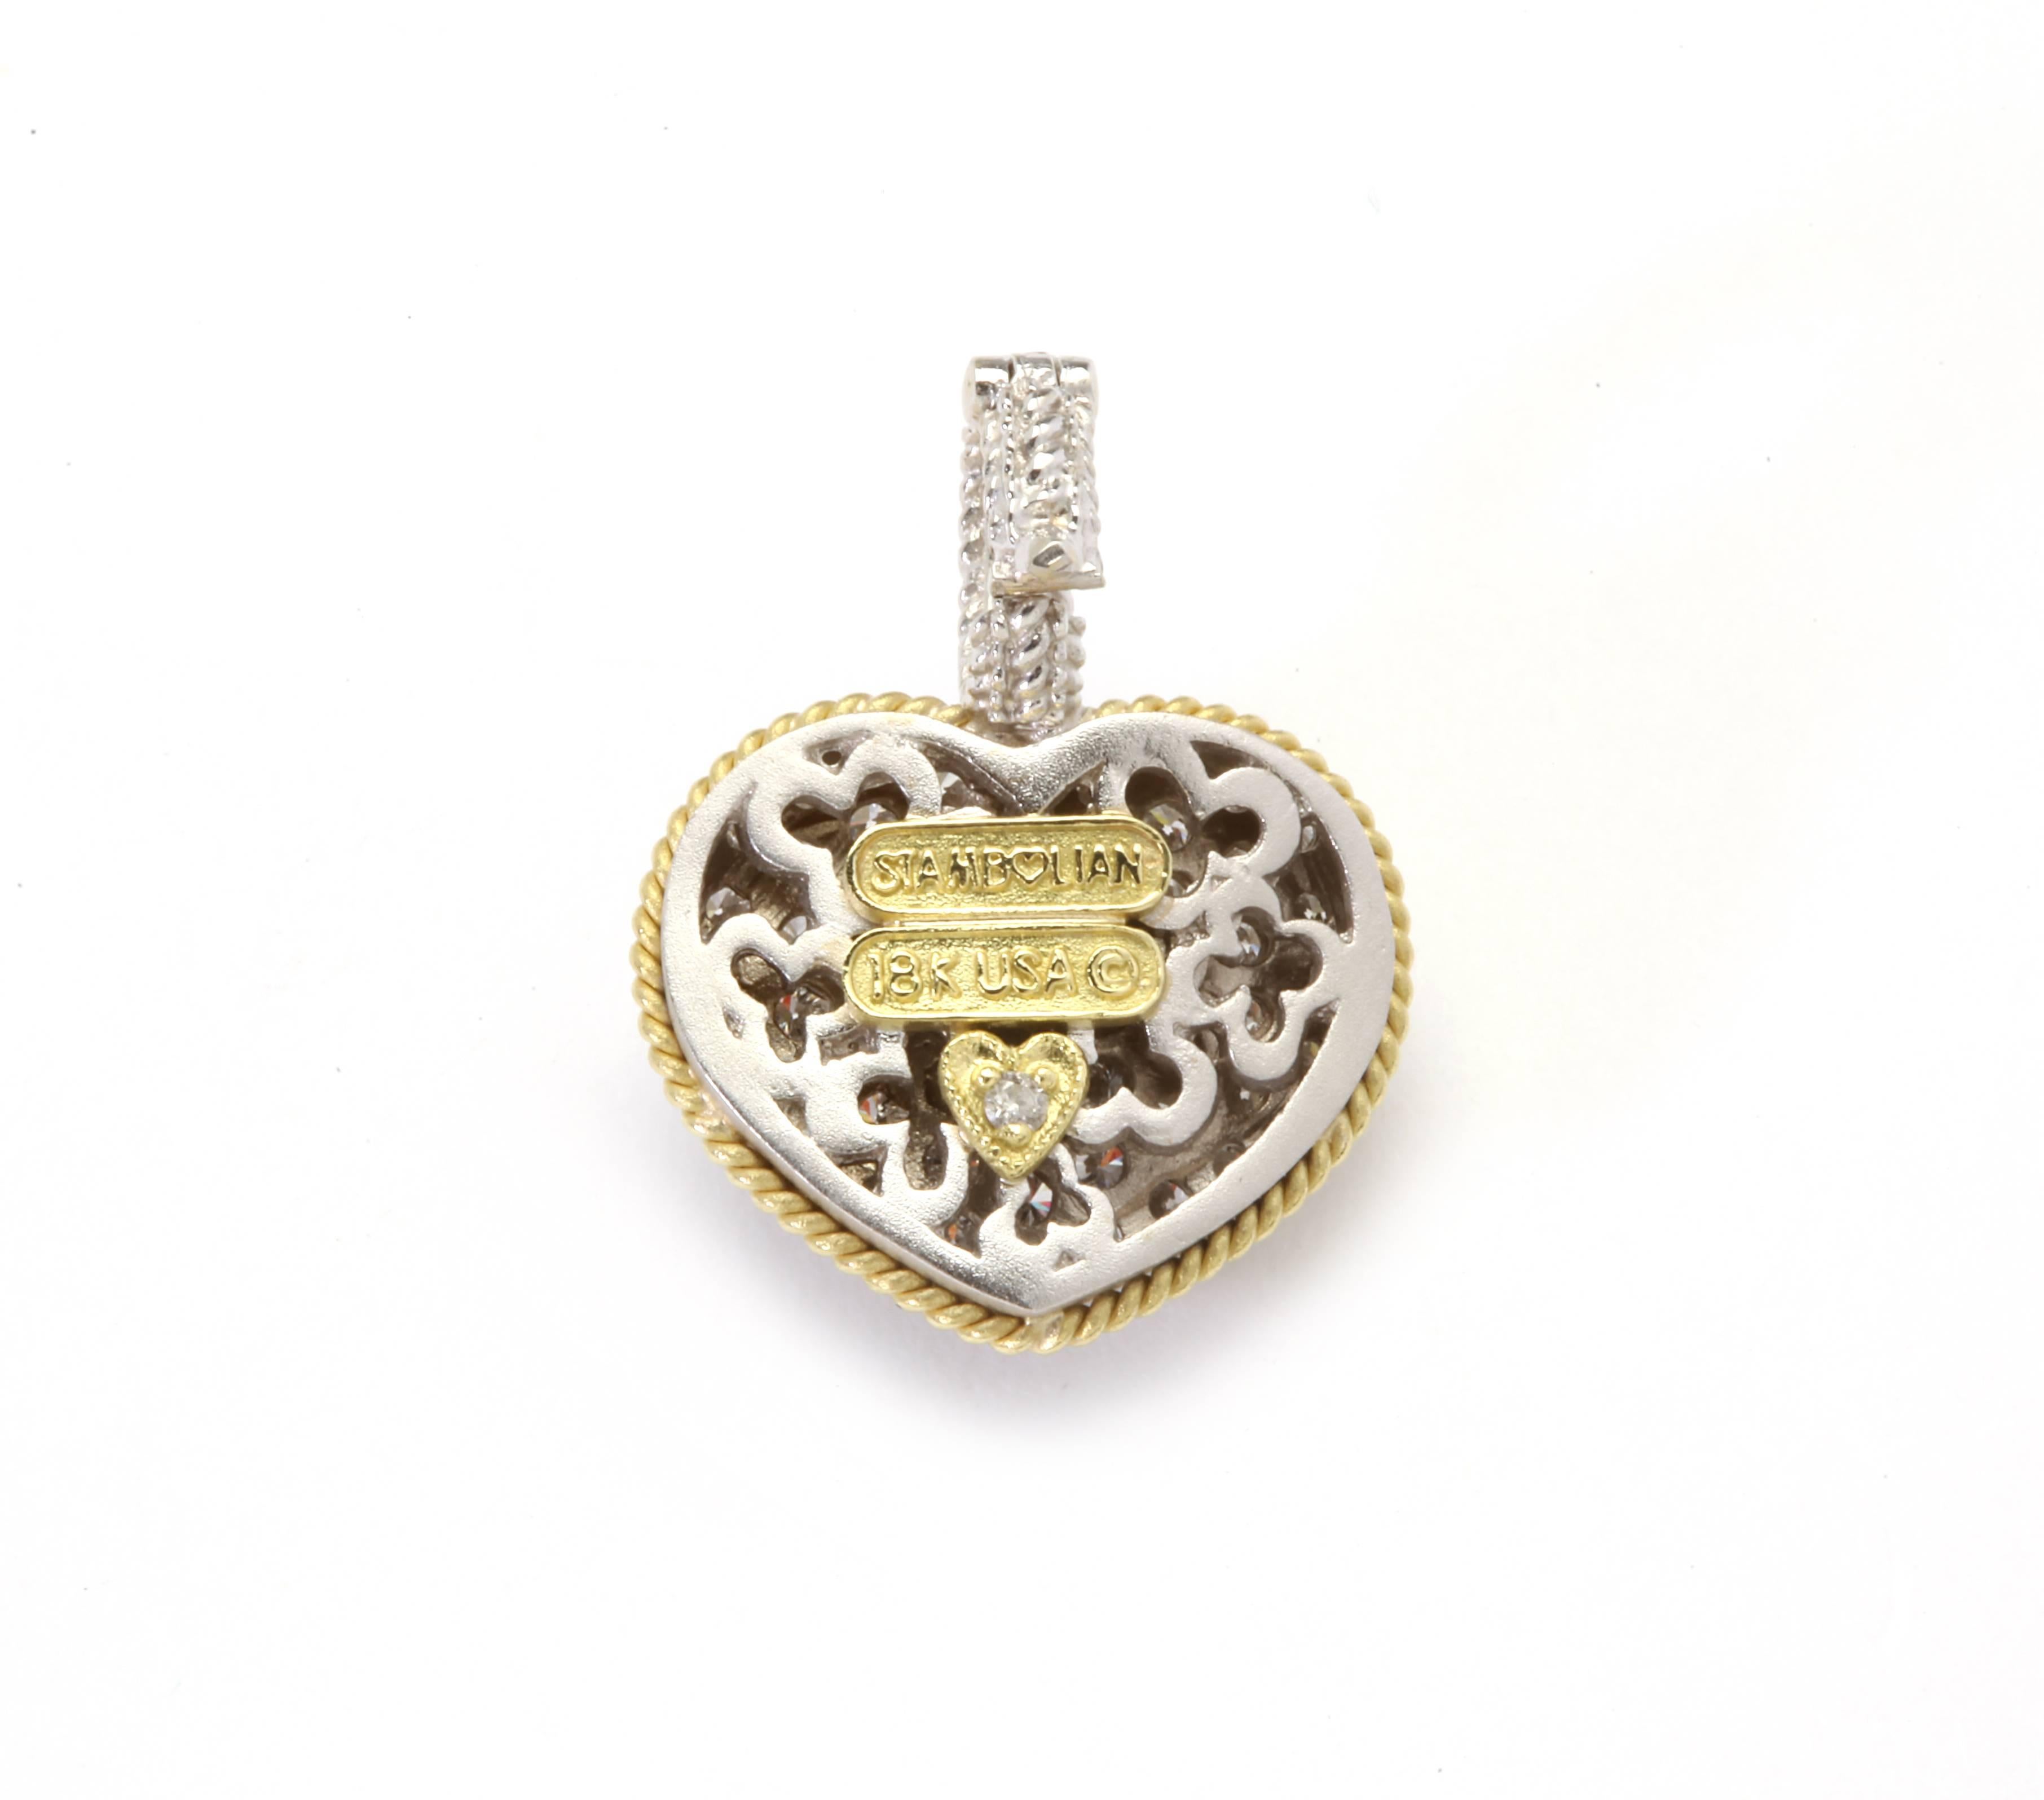 18K Gold Heart Enhancer Pendant with diamonds

Heart has a concave effect to it. 

Diamonds cover from the top of bell to being pavé set throughout the piece

1.50ct. G Color, VS Clarity Diamonds

1 inch length

Signed STAMBOLIAN with our Trademark